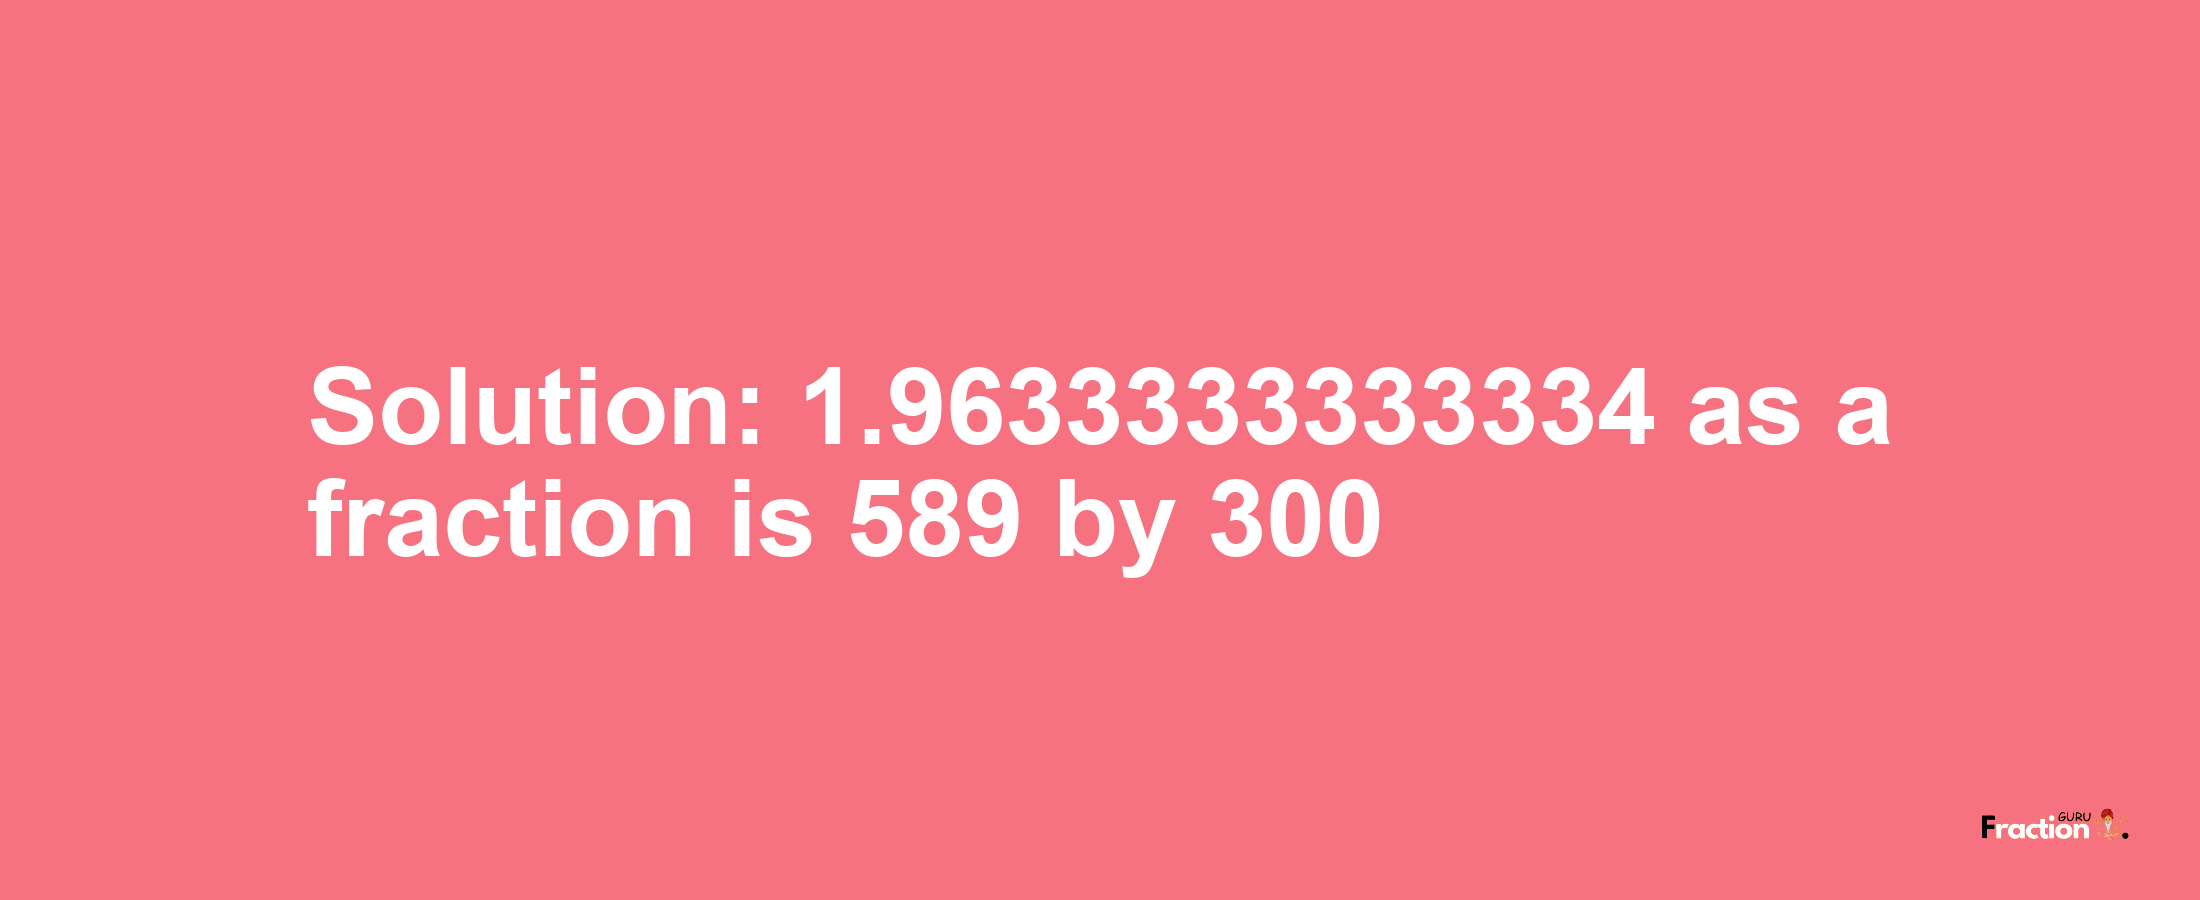 Solution:1.9633333333334 as a fraction is 589/300